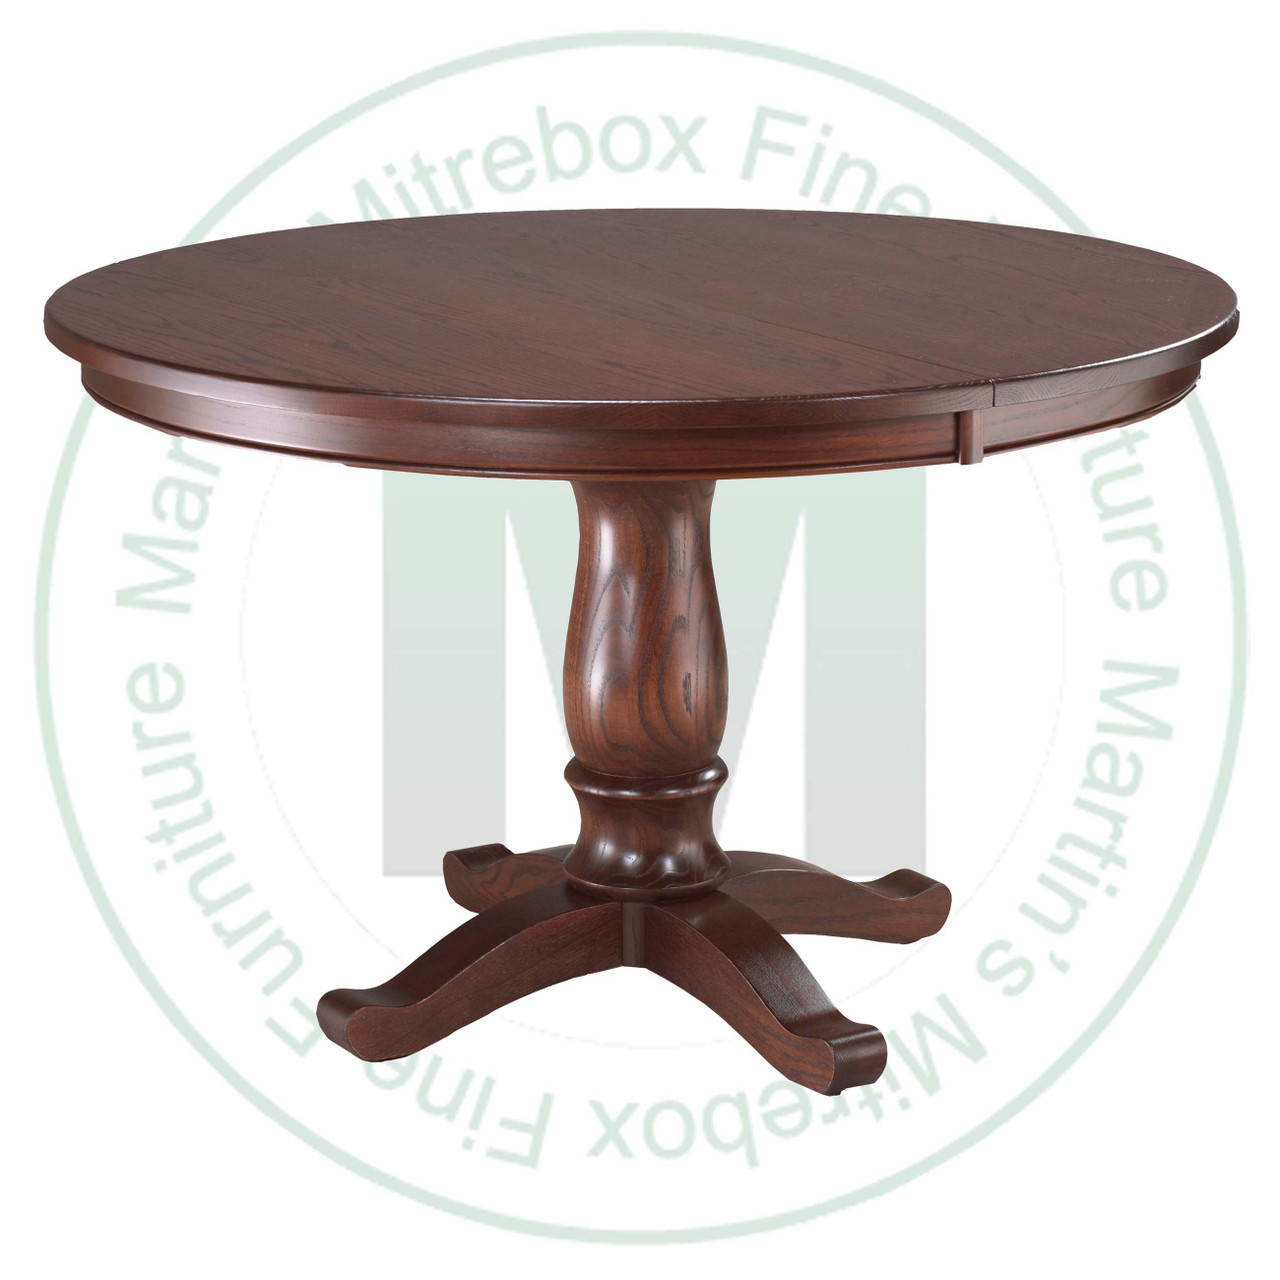 Oak Kimberly Crest Single Pedestal Table 42''D x 42''W x 30''H With 1 - 12'' Leaf Table